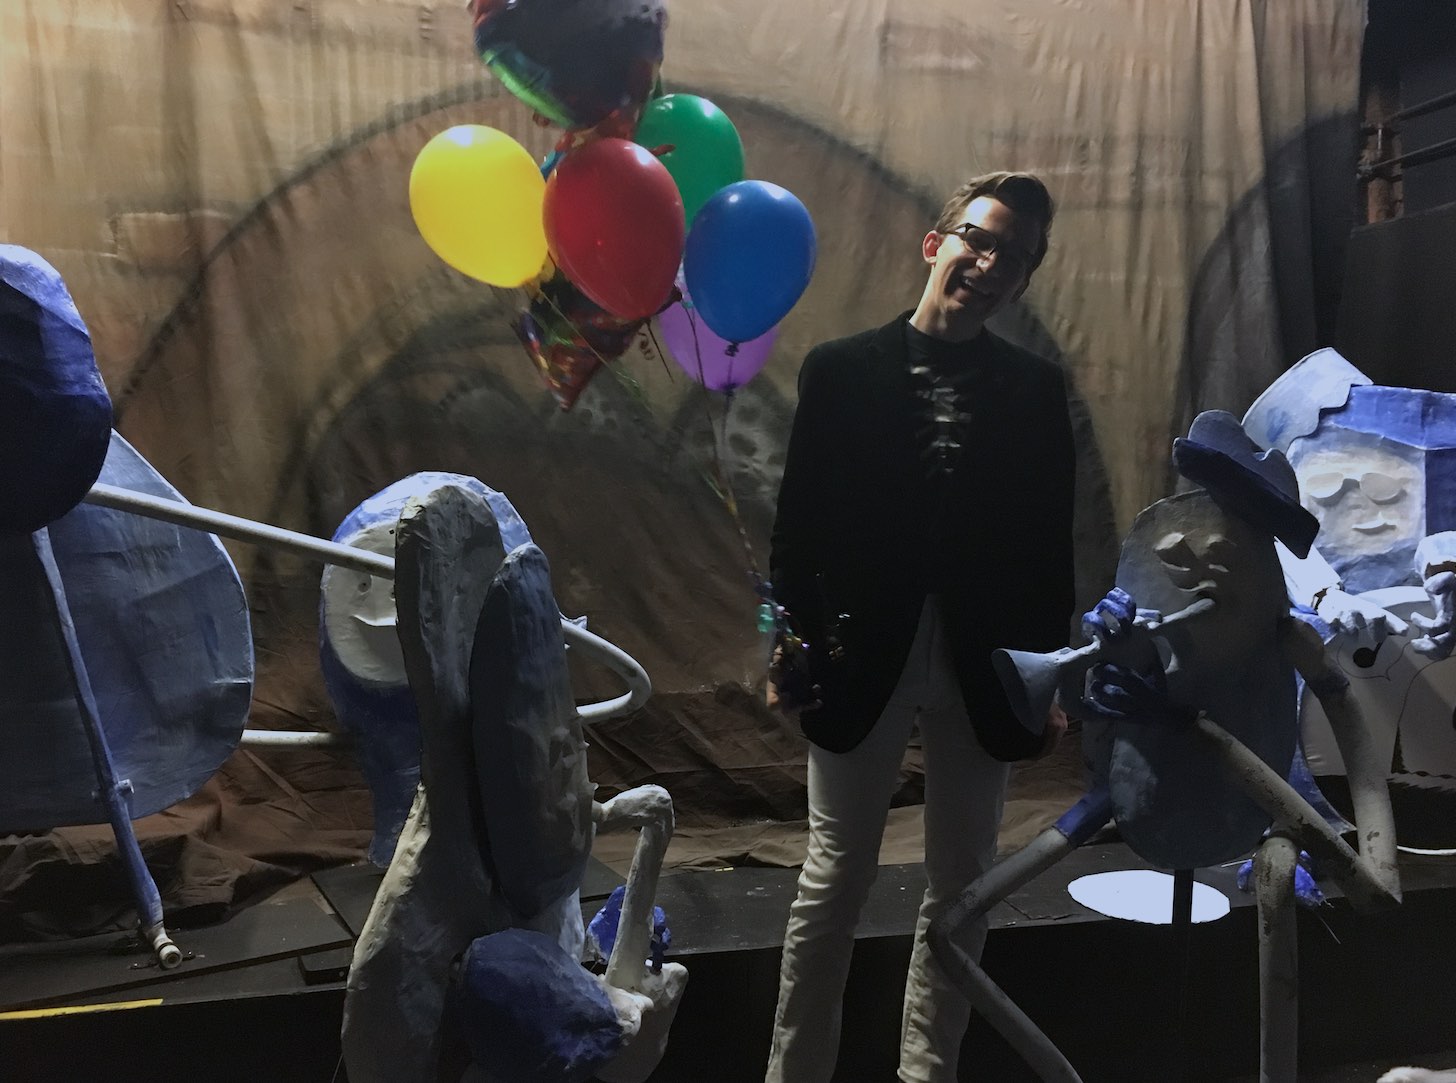 Me, with balloons, on set at Graveyard Swing 2016